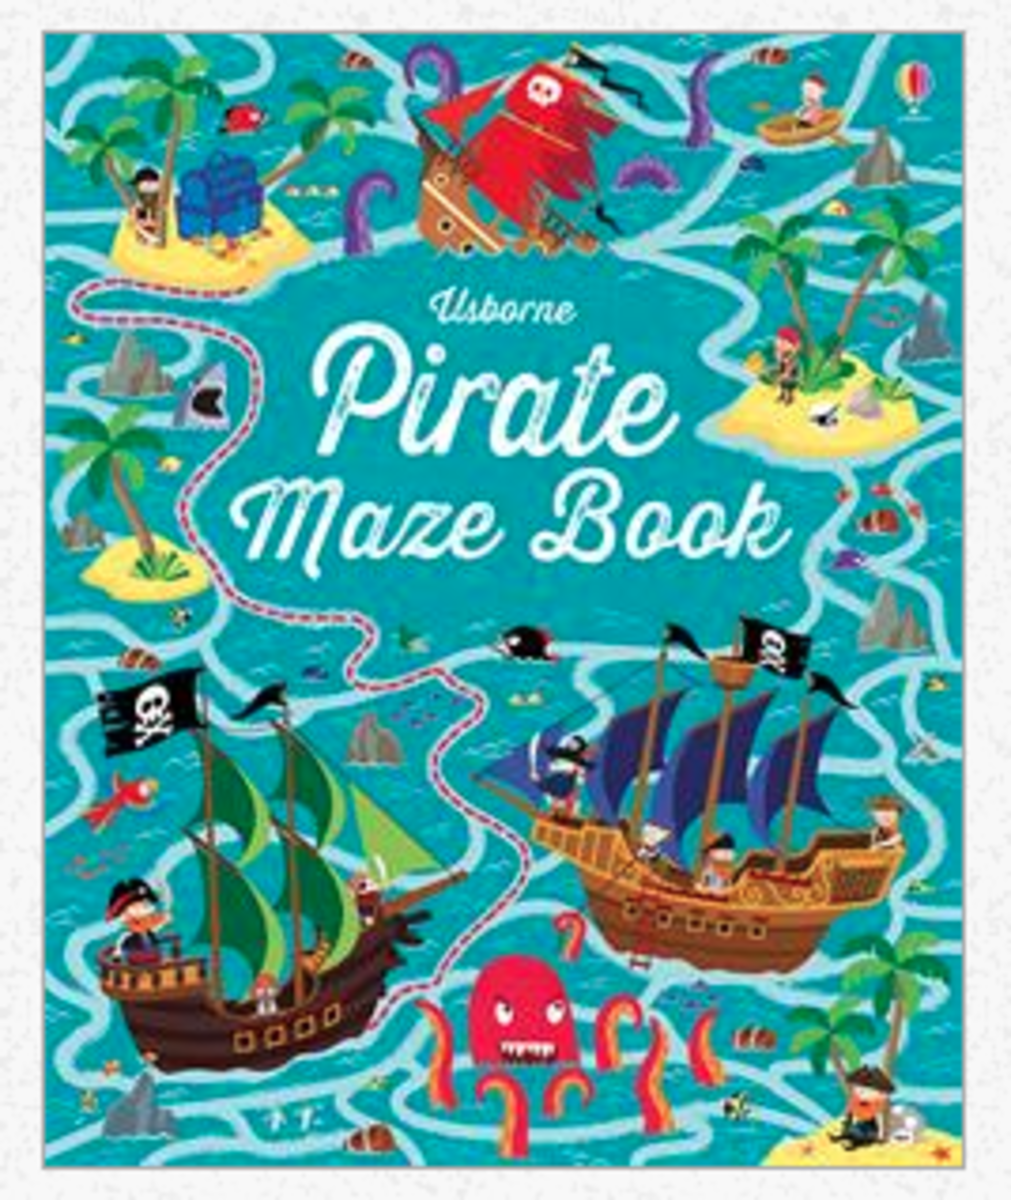 A great book of mazes!